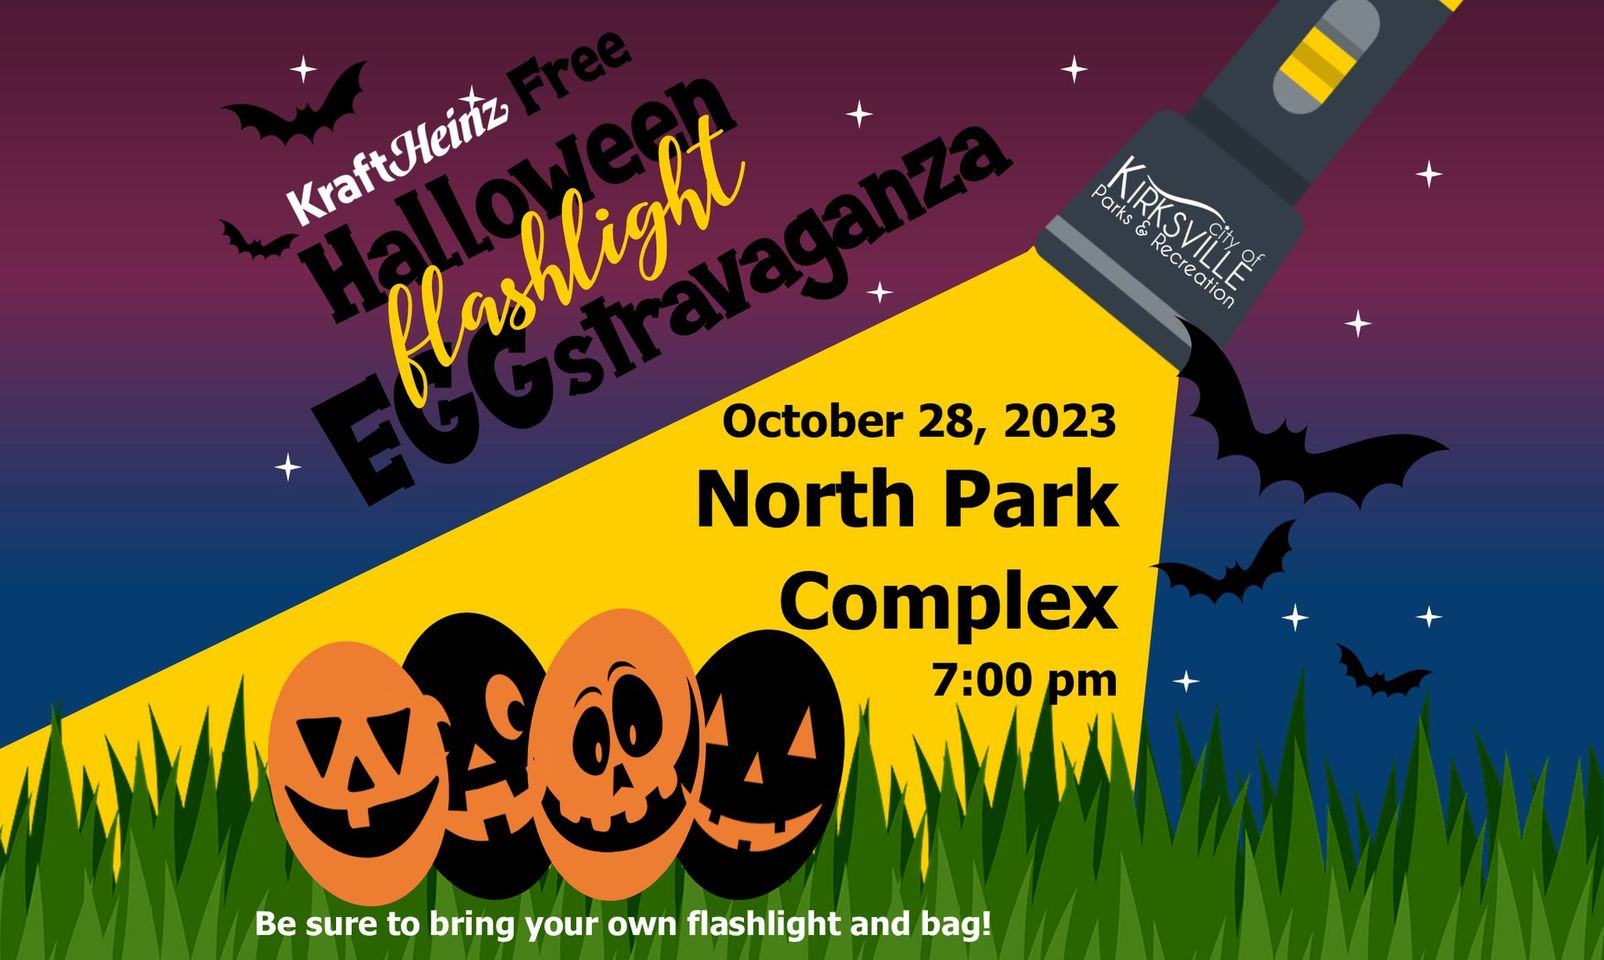 Check more about 7th Annual Halloween Eggstravaganza